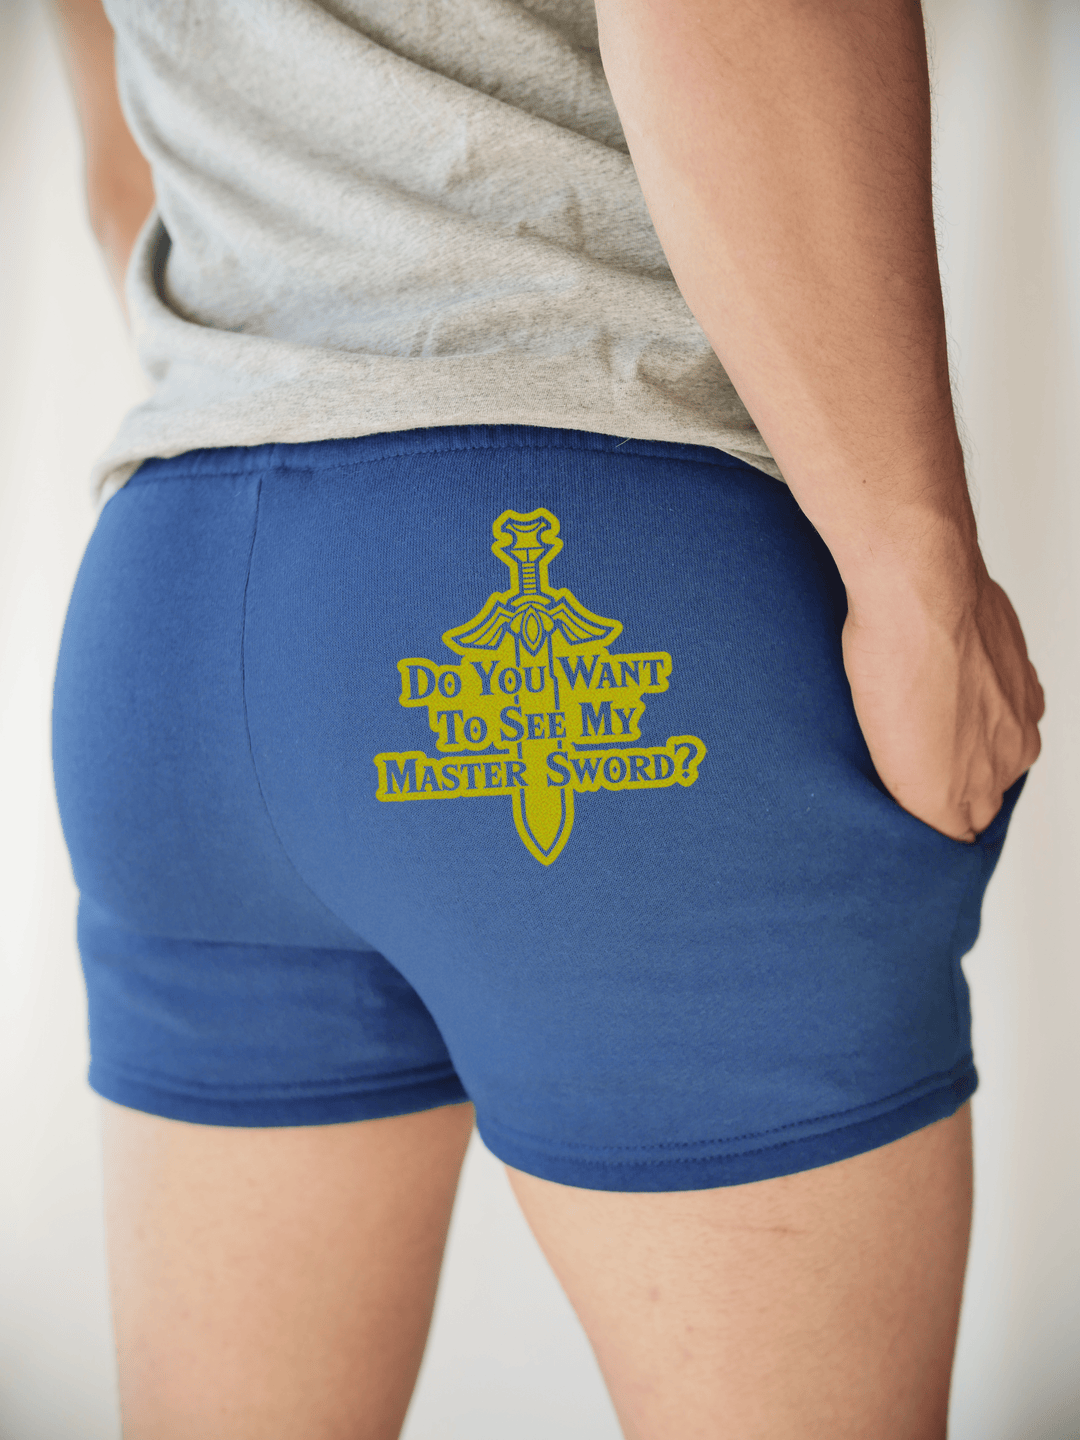 PixelThat Punderwear Shorts Royal Blue / S / Back Want to See My Master Sword? Men's Gym Shorts